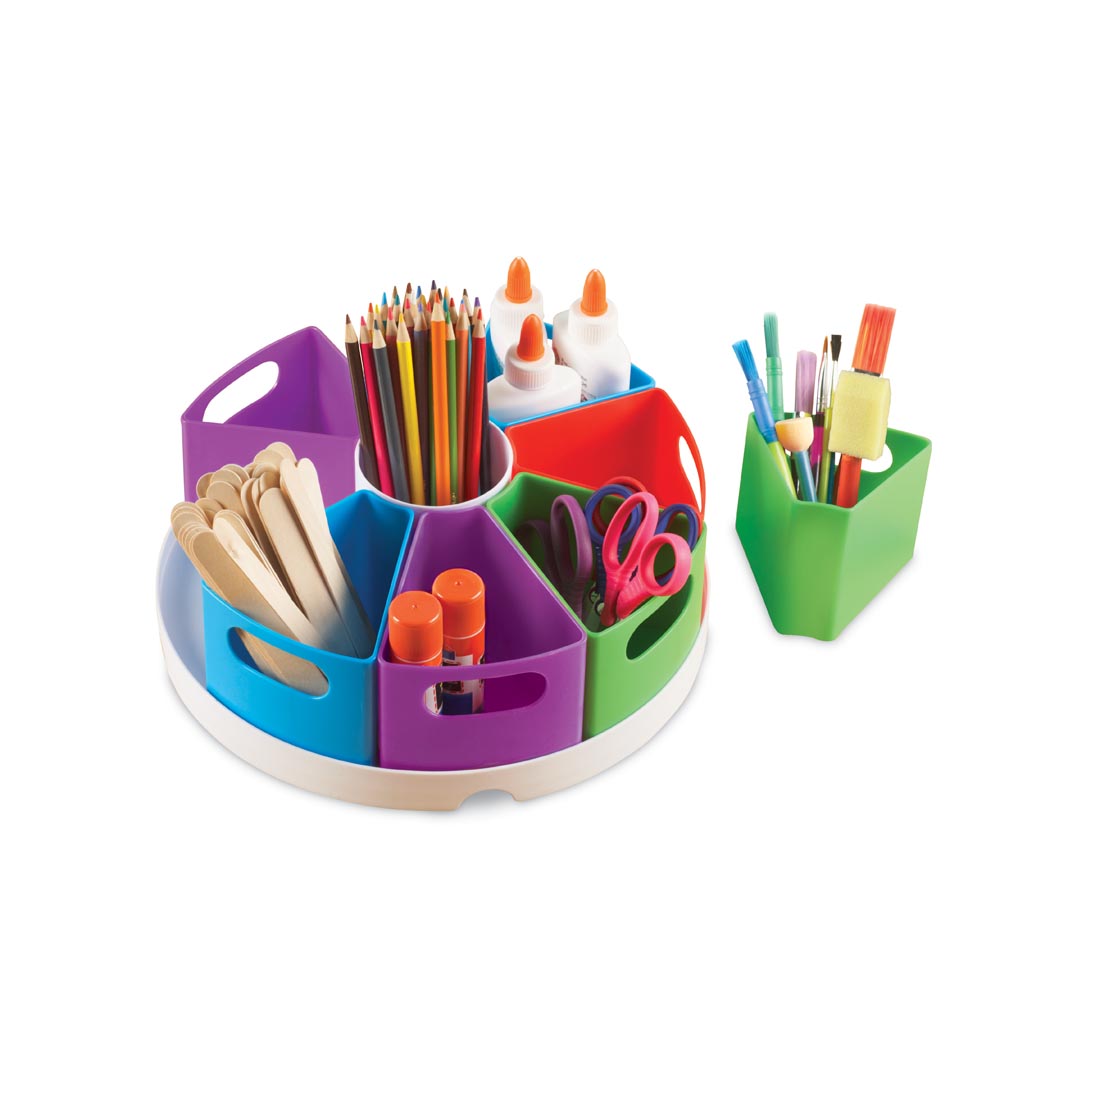 Storage Center with circular tray and individual compartments hold craft and school supplies